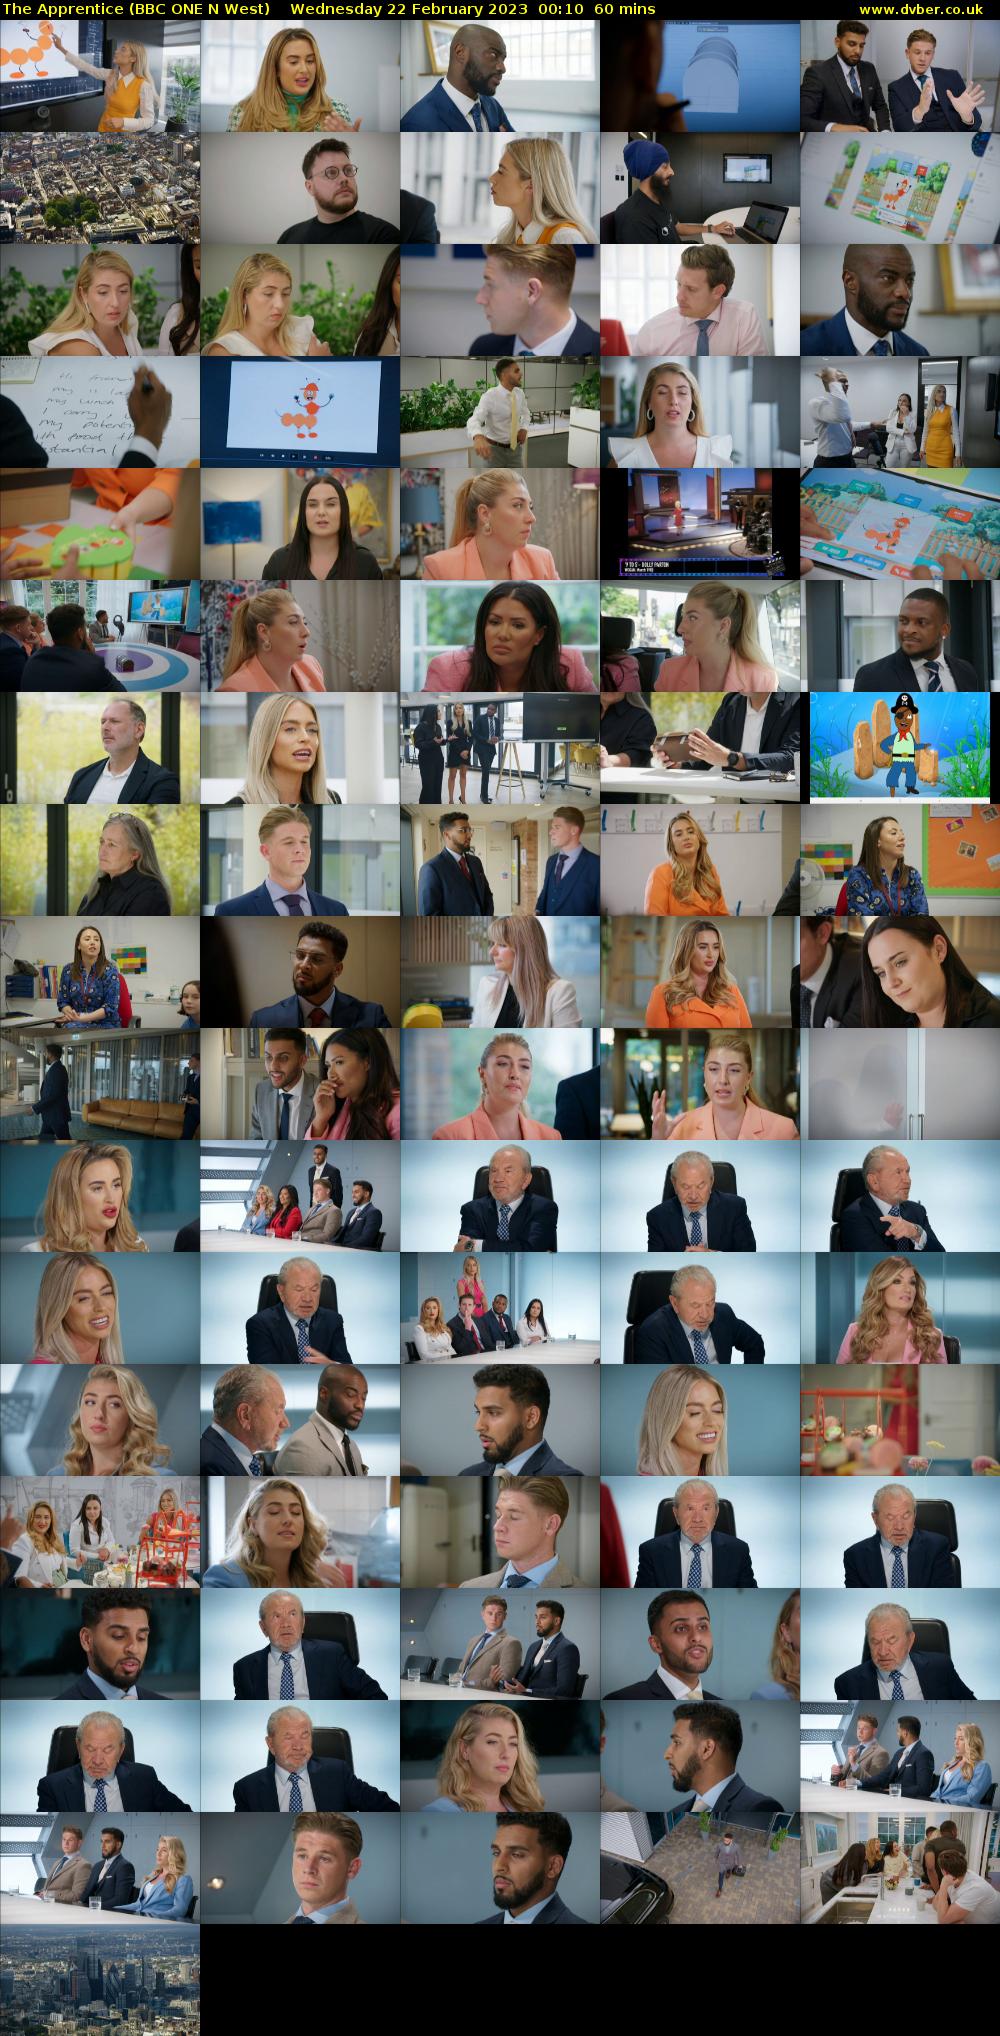 The Apprentice (BBC ONE N West) Wednesday 22 February 2023 00:10 - 01:10